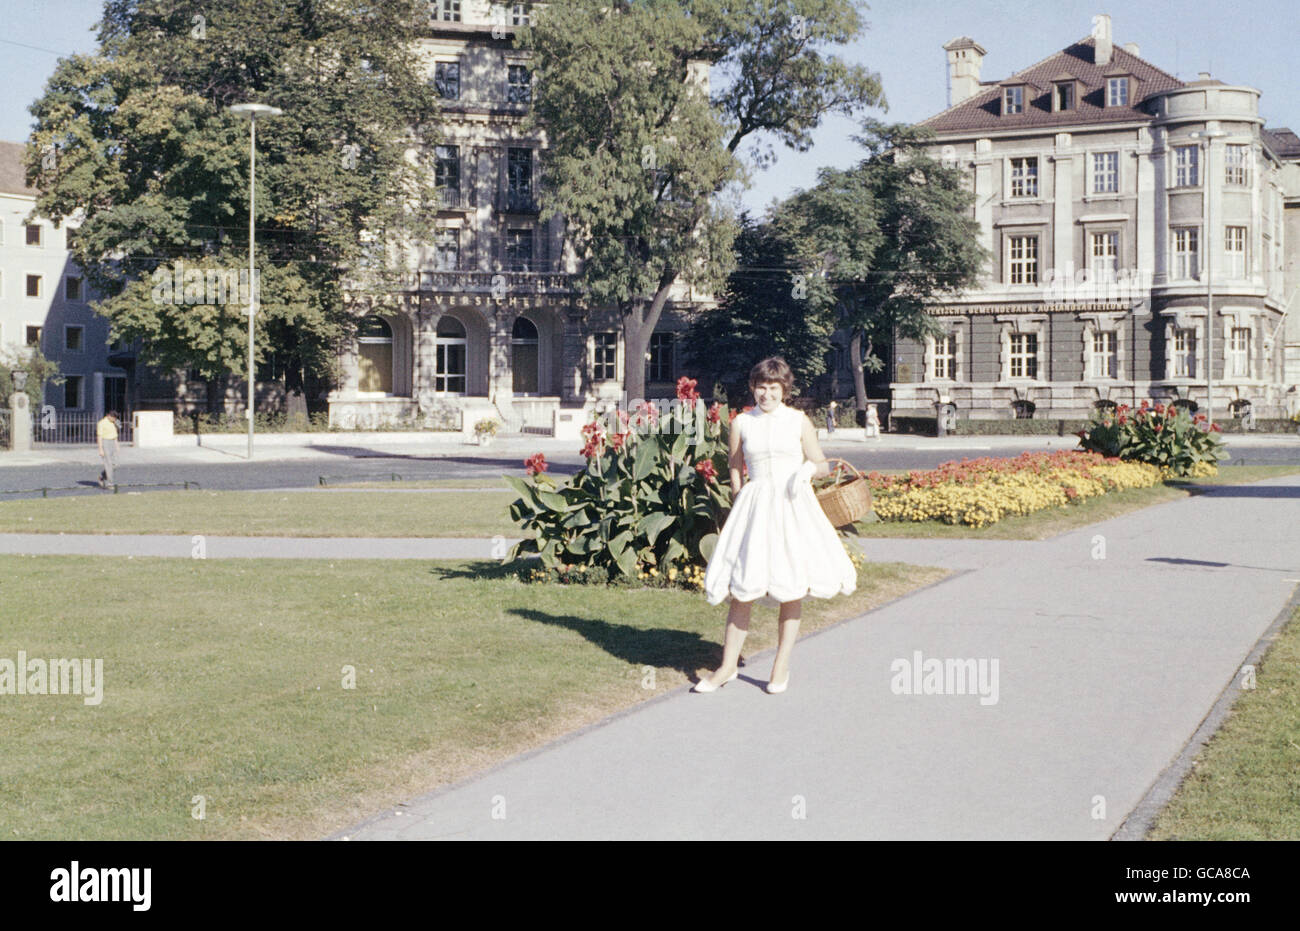 geography / travel, Germany, Bavaria, Munich, squares, Karolinenplatz (Caroline Square) with young woman, 1957/1958, Additional-Rights-Clearences-Not Available Stock Photo